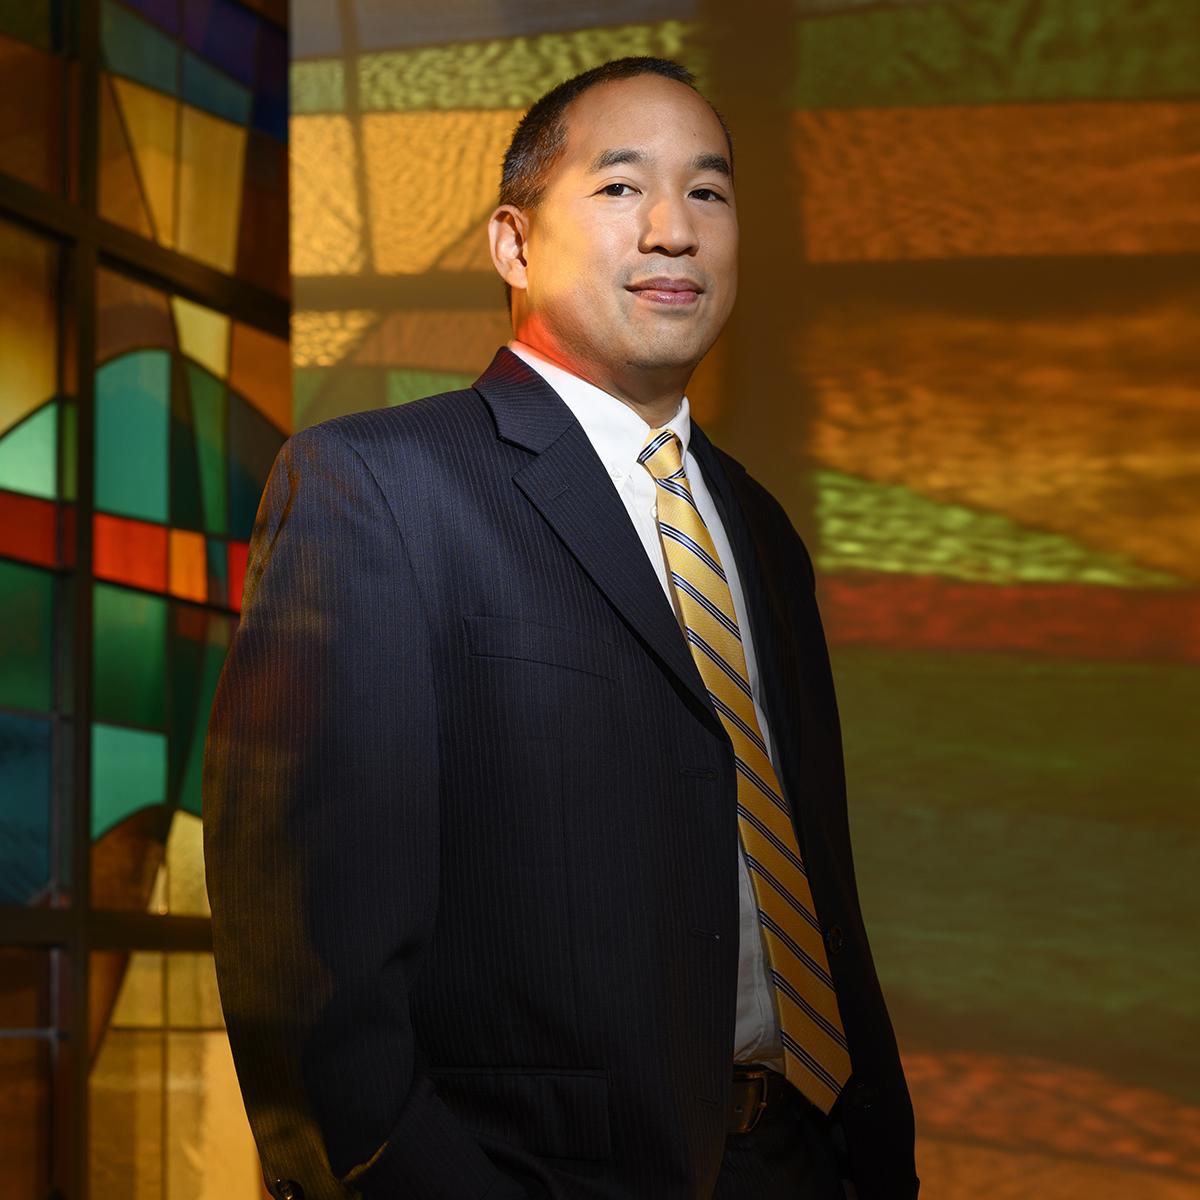 Photo of a smiling man in a suit, standing in front of colorful stained glass